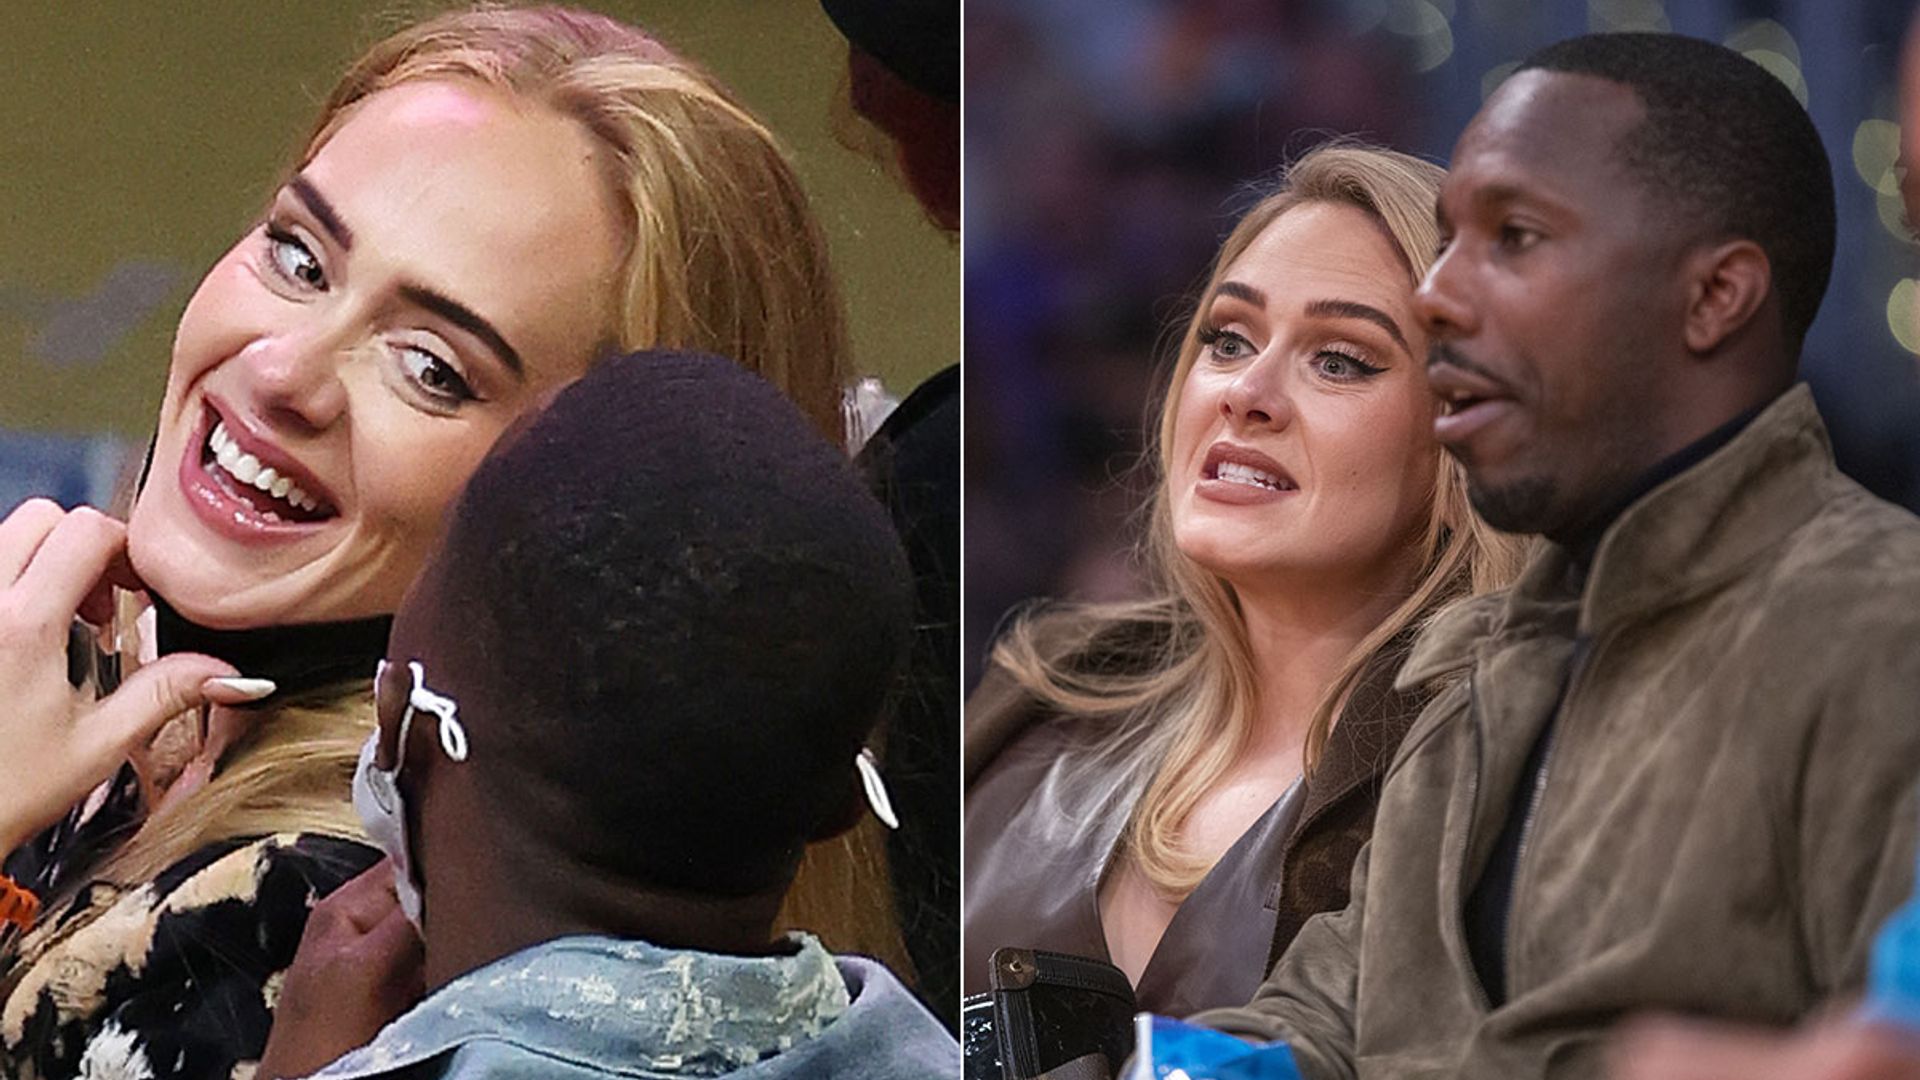 Adele and Rich Paul go Instagram official with new behind-the-scenes photo